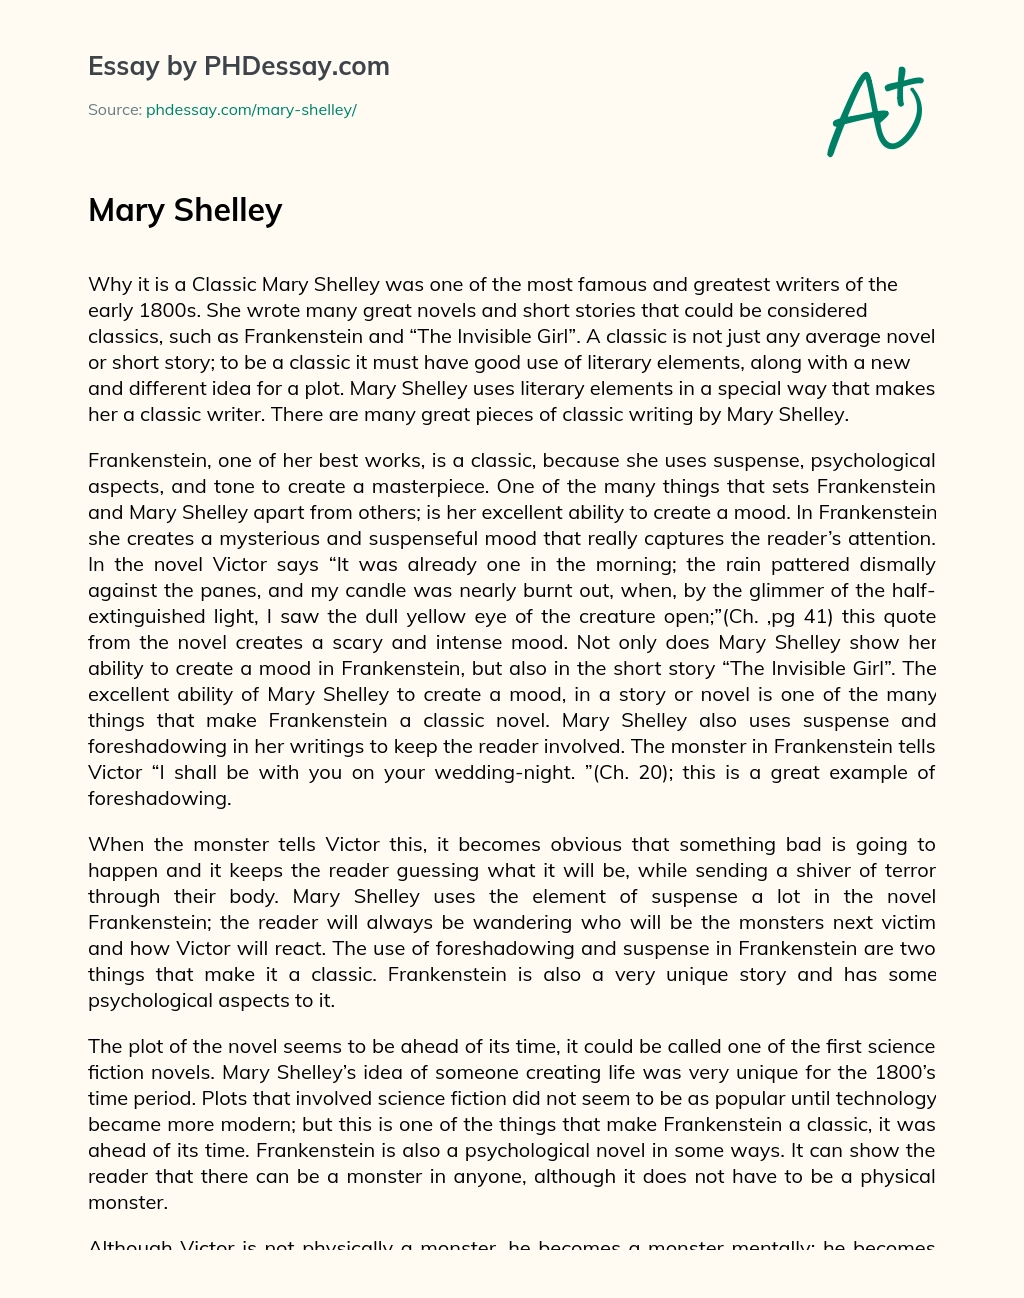 Mary Shelley’s Use of Literary Elements in Creating Classics essay